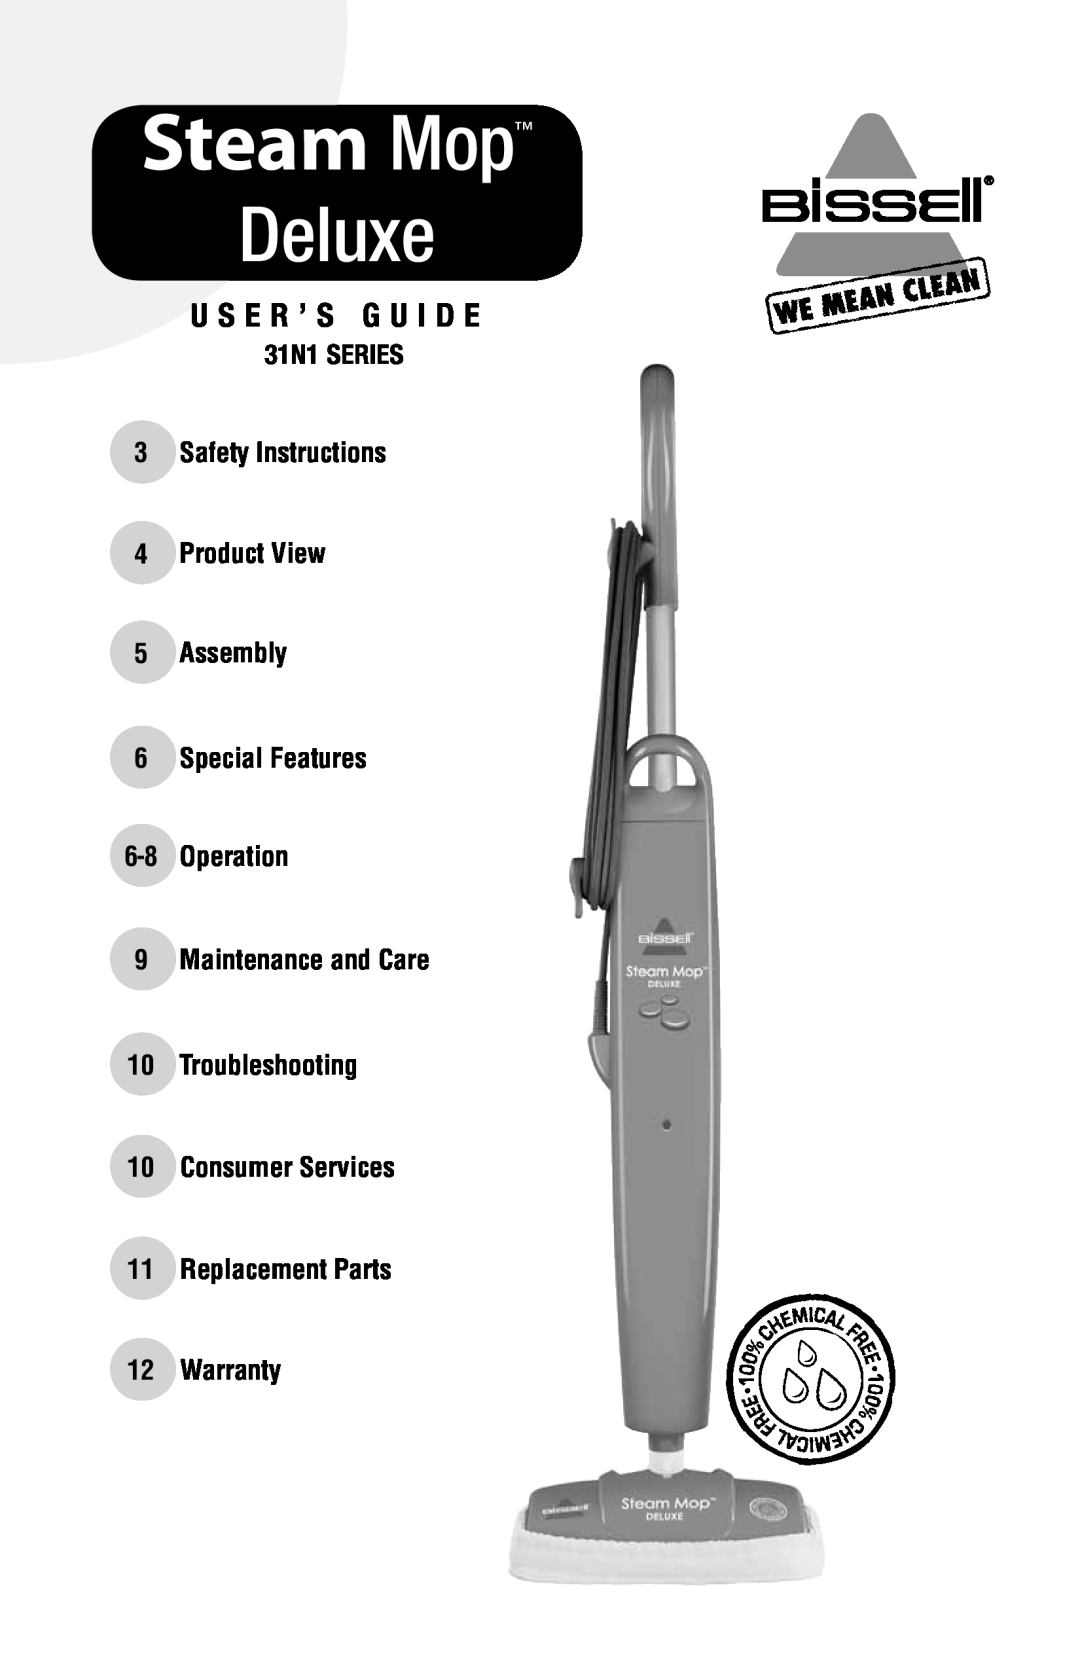 Bissell warranty U S E R ’ S G U I D E, Steam Mop, Deluxe, 31N1 SERIES, 3Safety Instructions 4Product View 5Assembly 